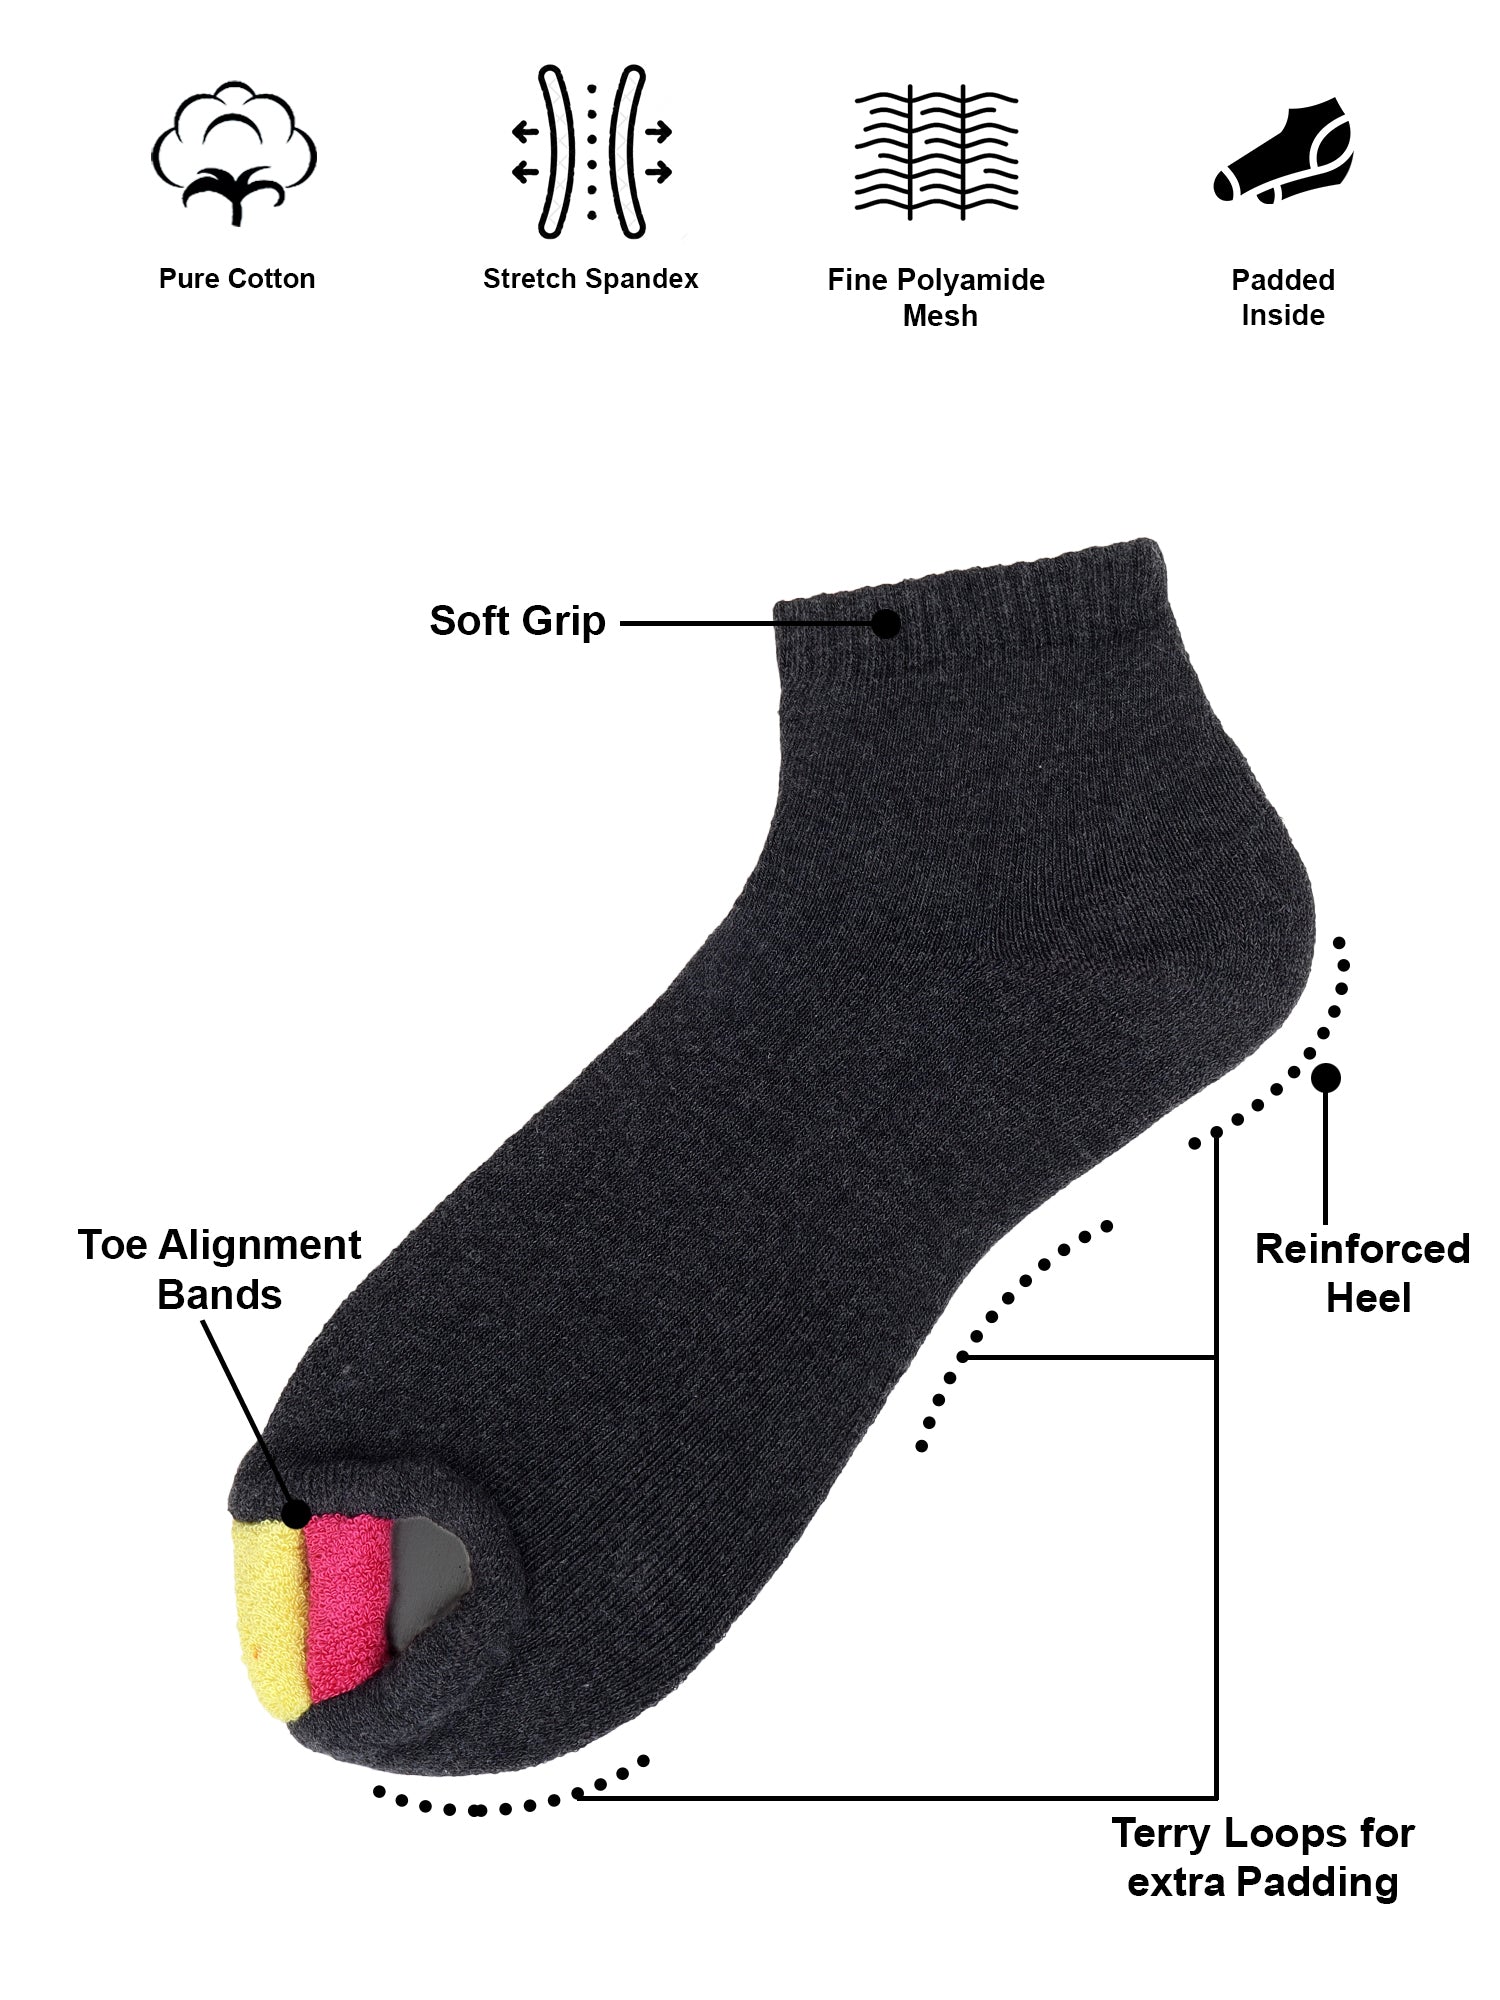 3 easy steps to maximize the benefits of Foot Alignment Socks 